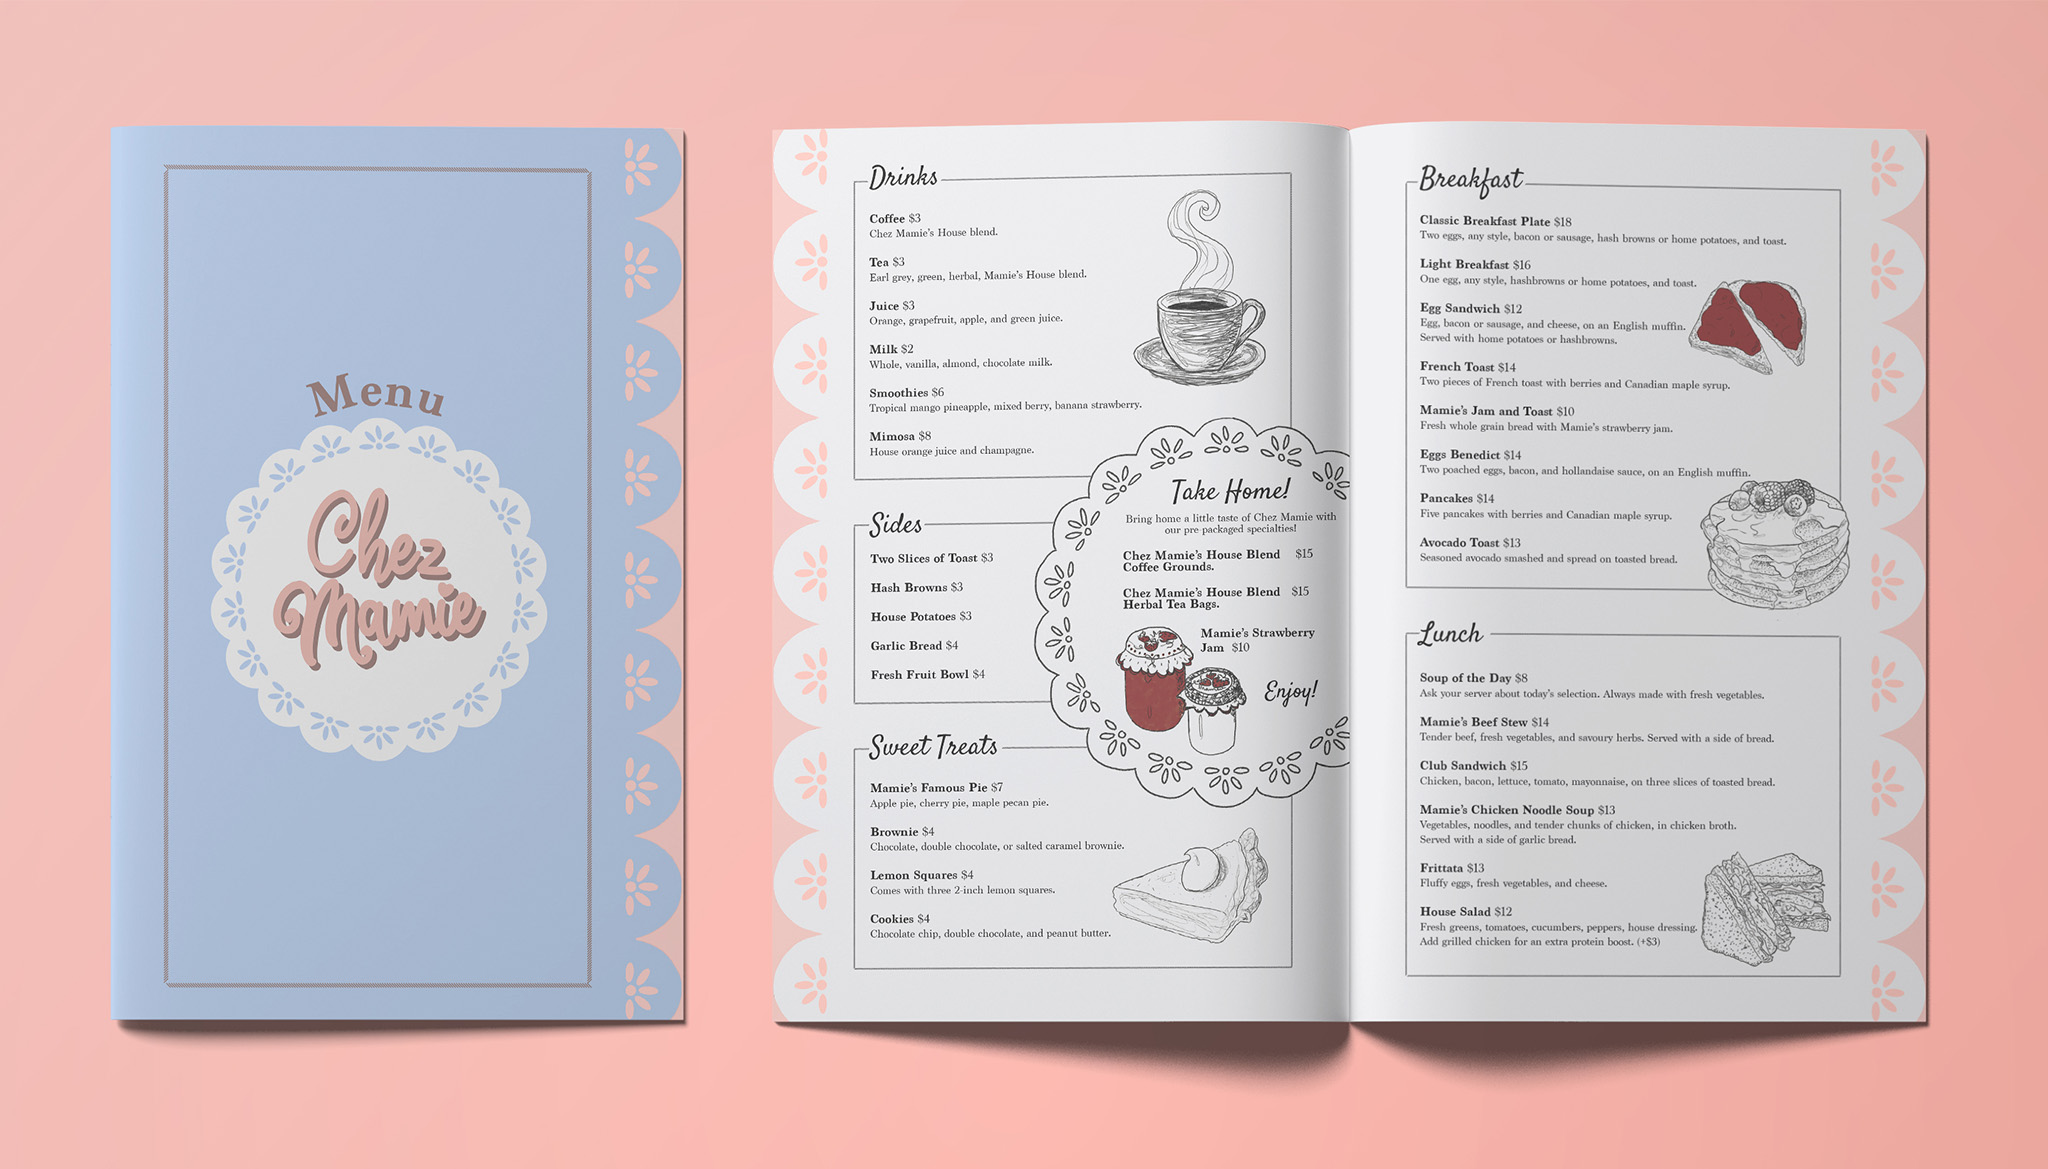 Mockup of menu design for fictional cafe Chez Mamie. Design has doily pattern edges, logo on the front with the word menu and blue cover. Inside of the menu has illustrations of food items and text.